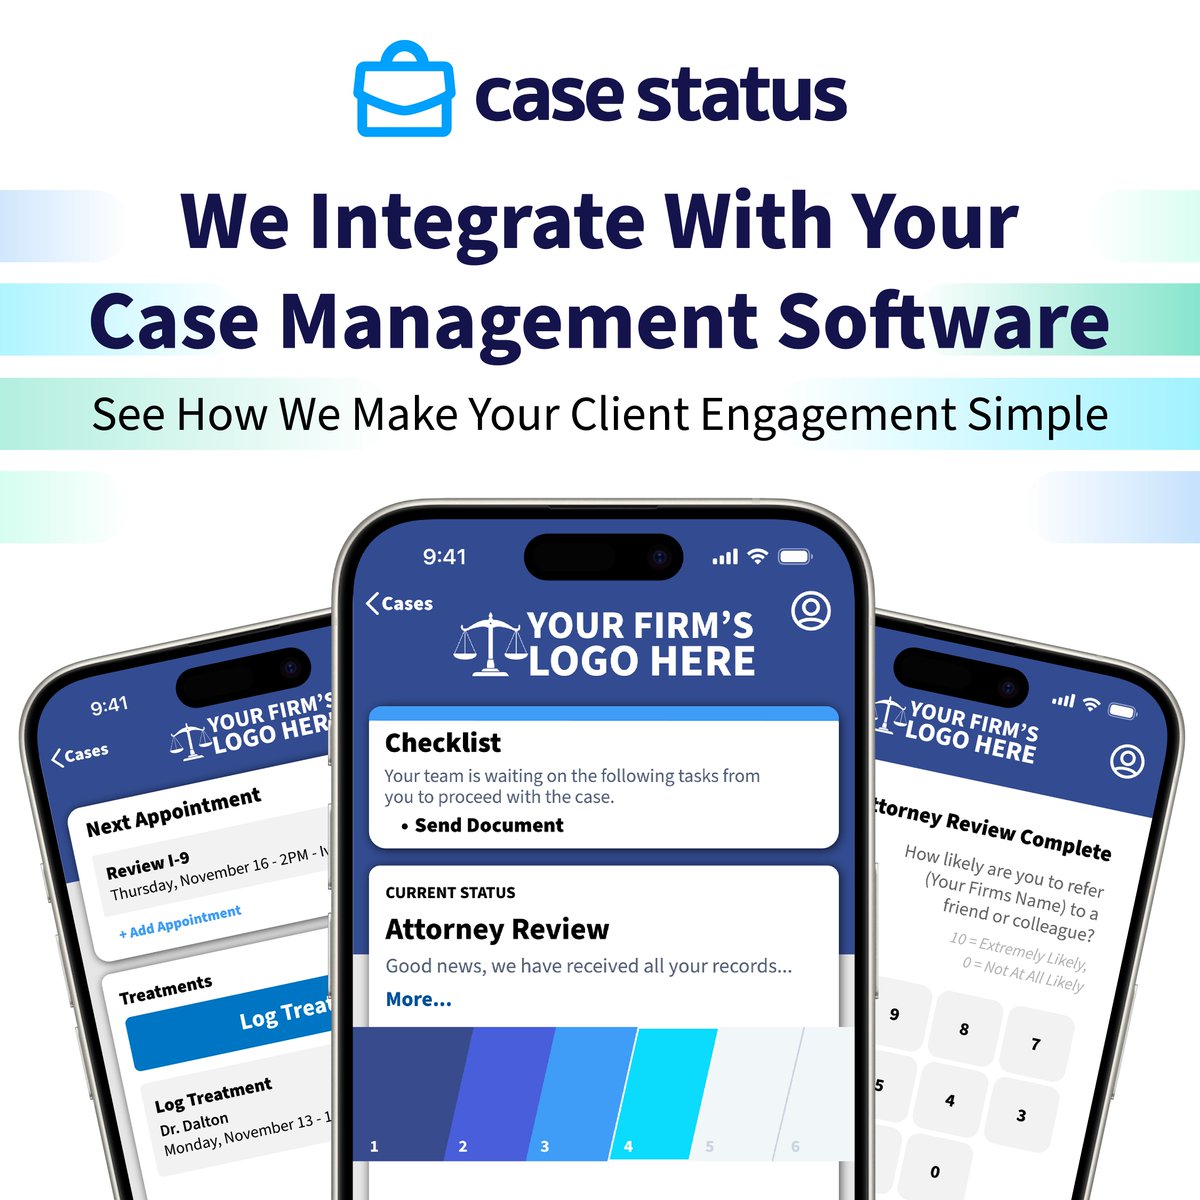 Tired of double data entry and clunky workflows? Look no further, we integrate with your Case Management System! 💼

hubs.ly/Q02xN9-p0

#CaseManagement #IntegrationPartners #DemoNow #CaseStatus #ClientEngagement #LegalTech #LegalTechnology #ClientCommunication